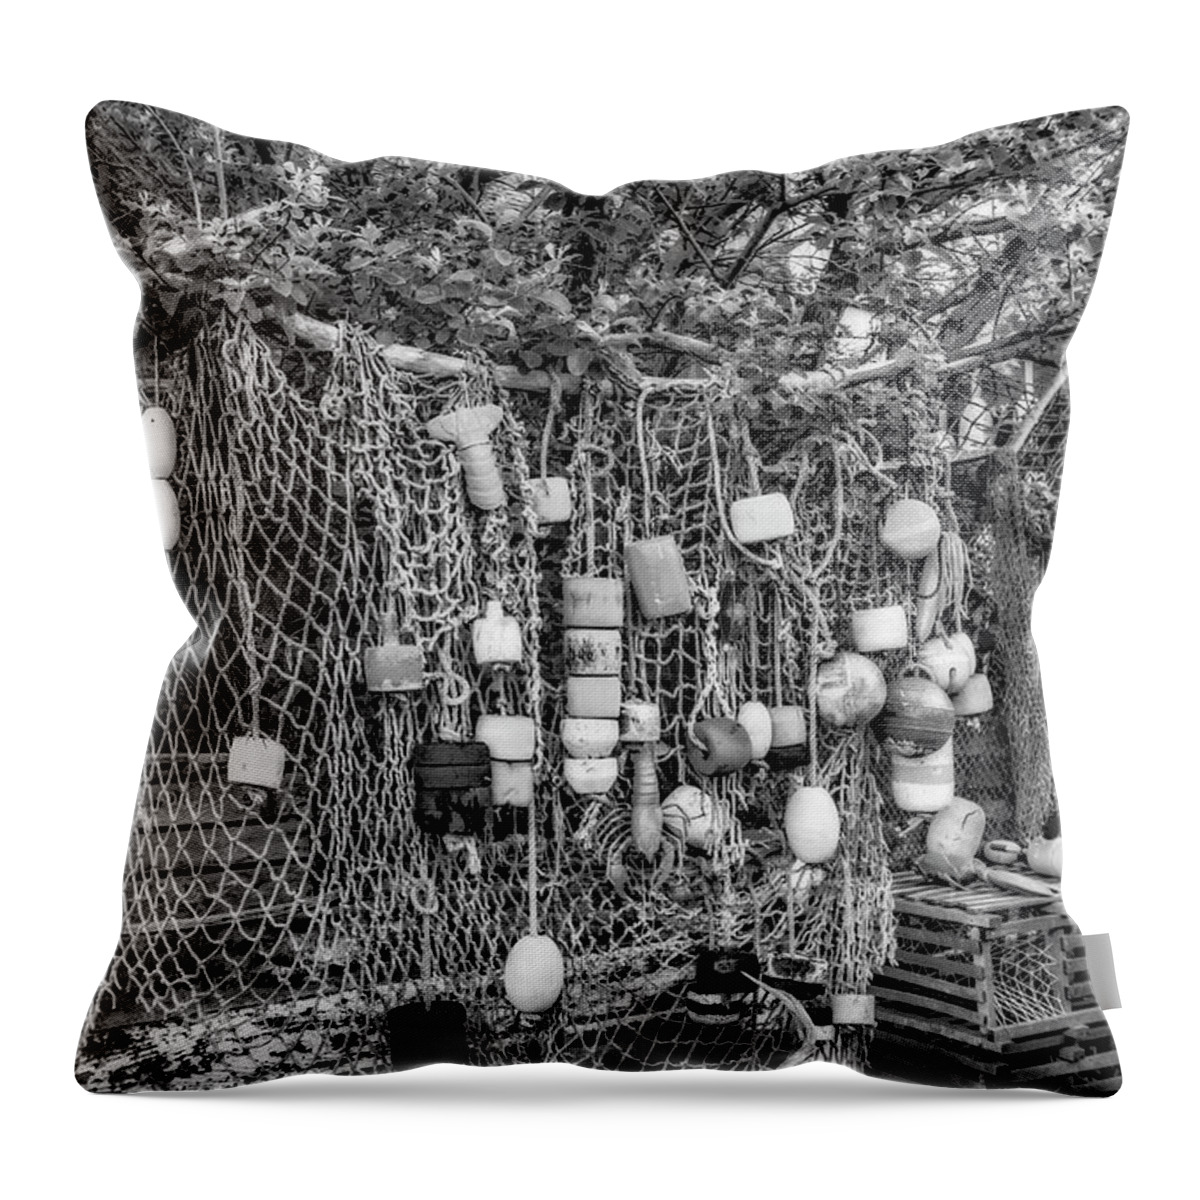 Bradley Wharf Throw Pillow featuring the photograph Rockport Fishing Net And Buoys BW by Susan Candelario